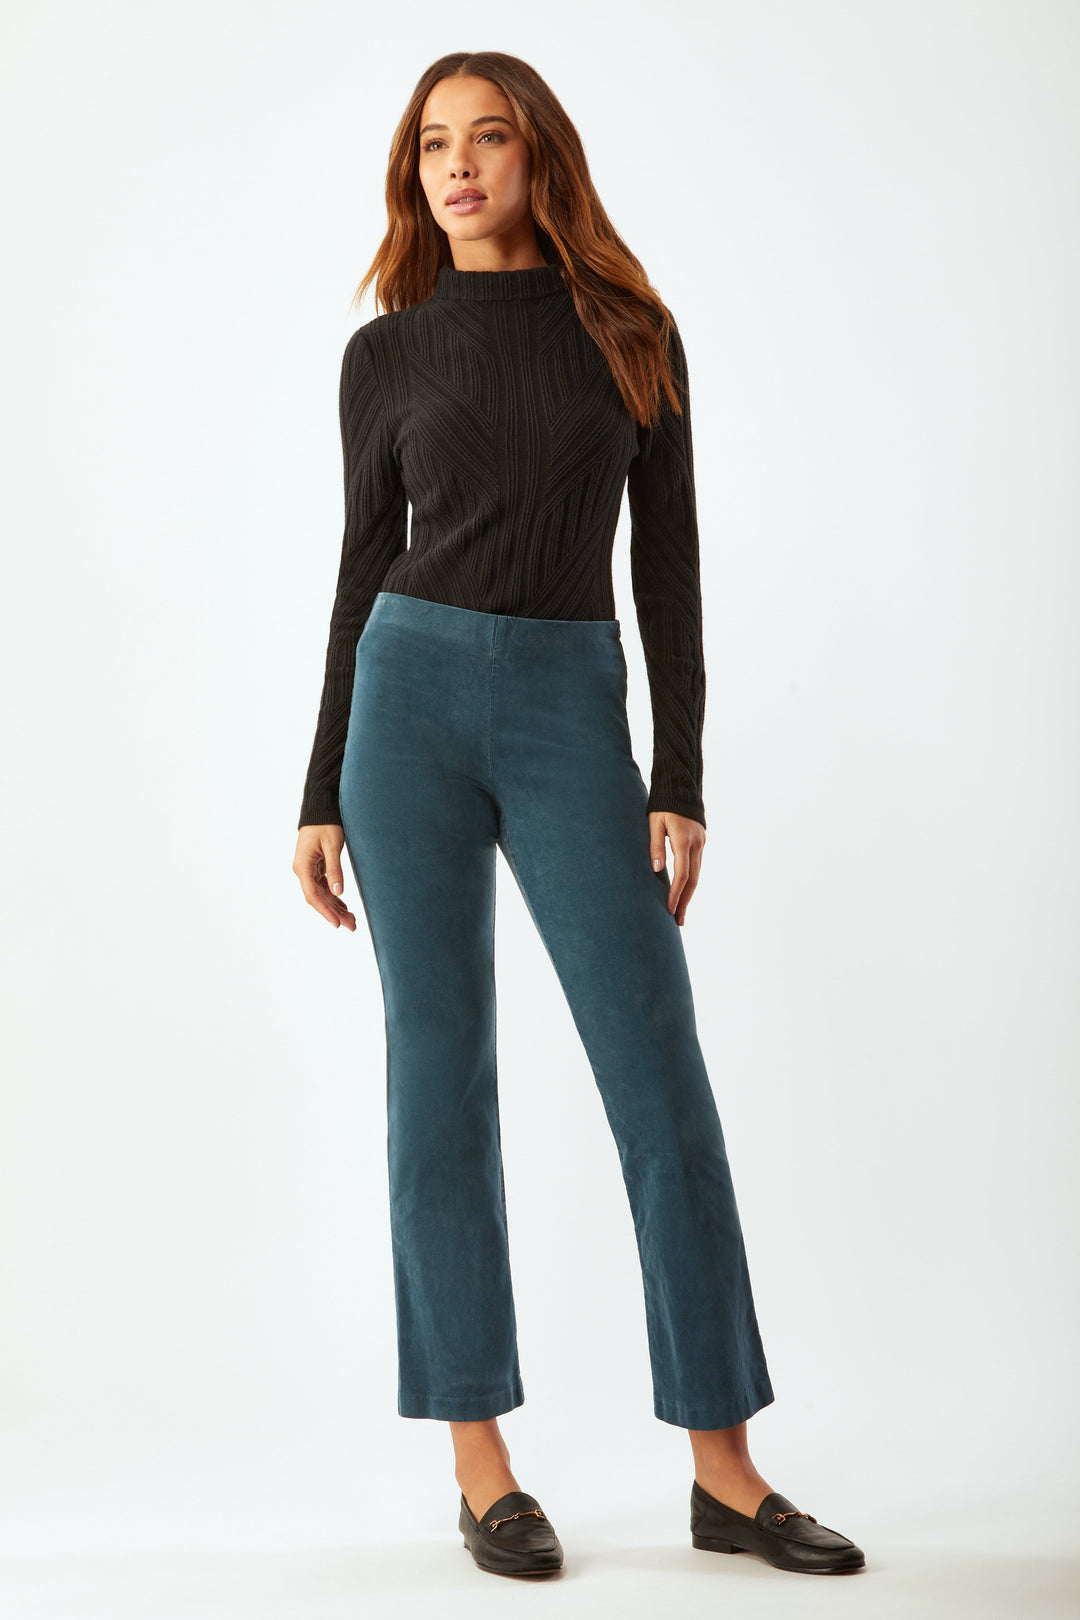 Prince Cropped Flare Pant In Corduroy- Pond